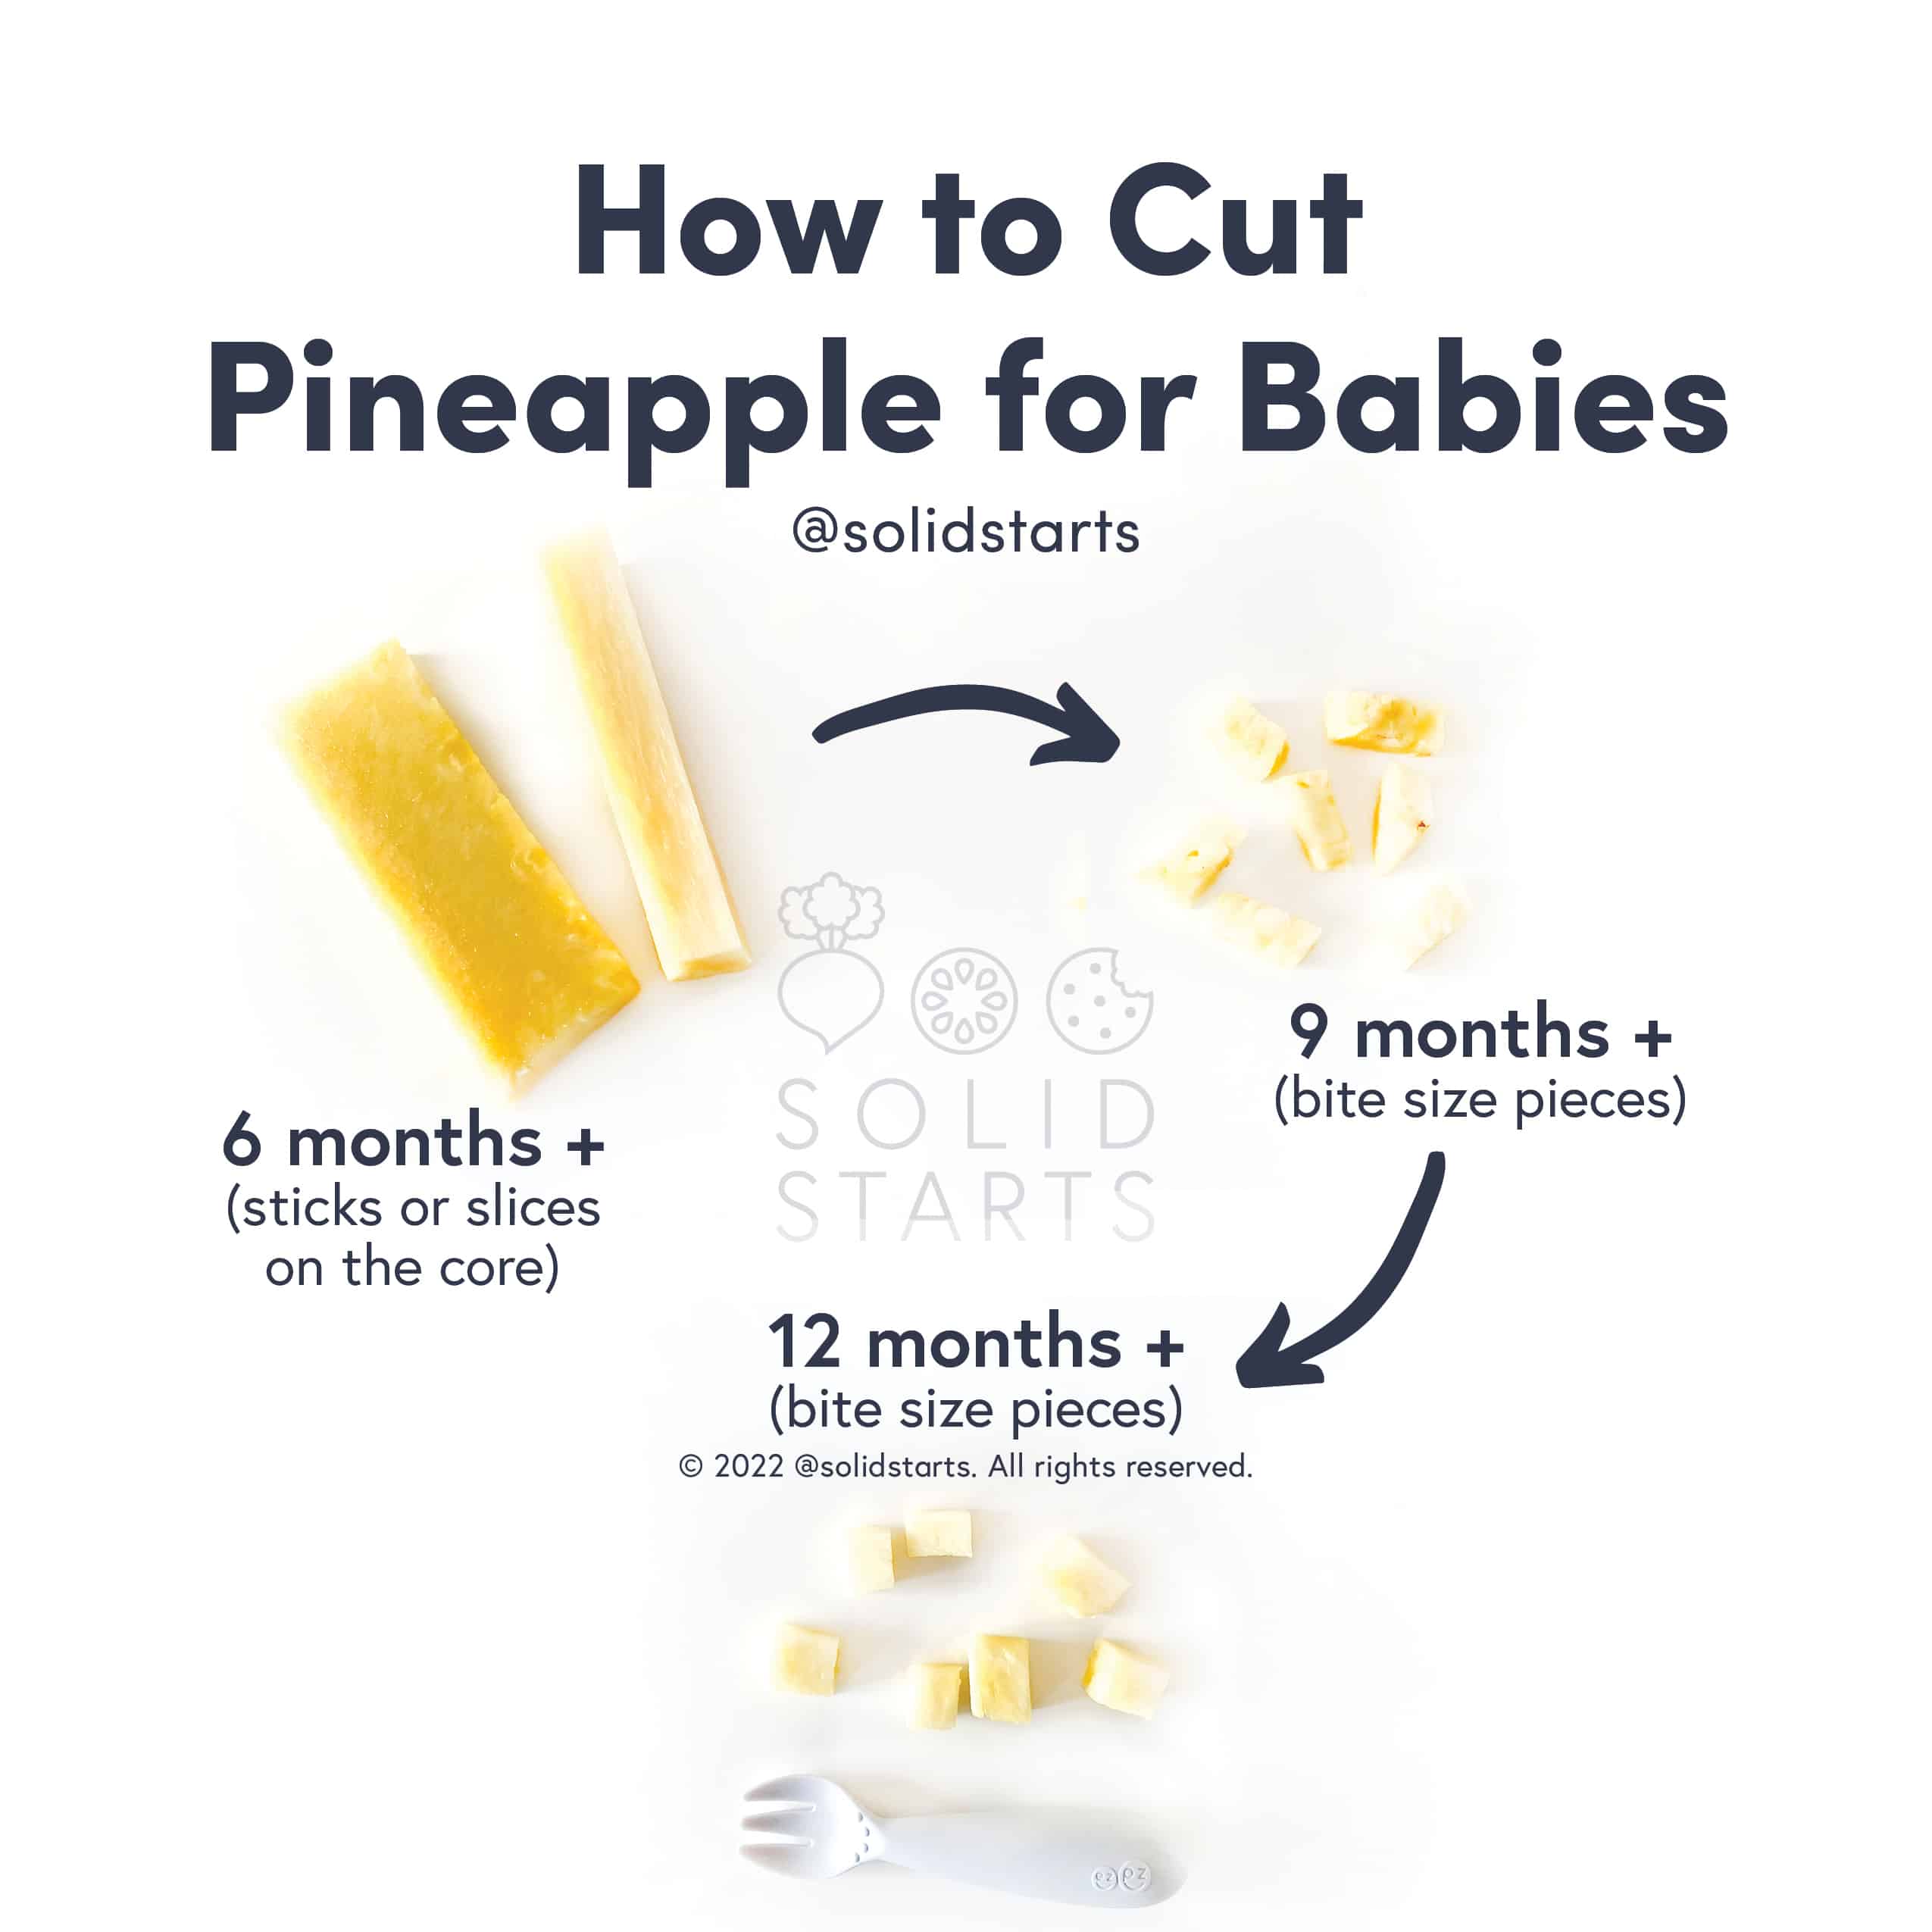 How to Cut Pineapple for Babies